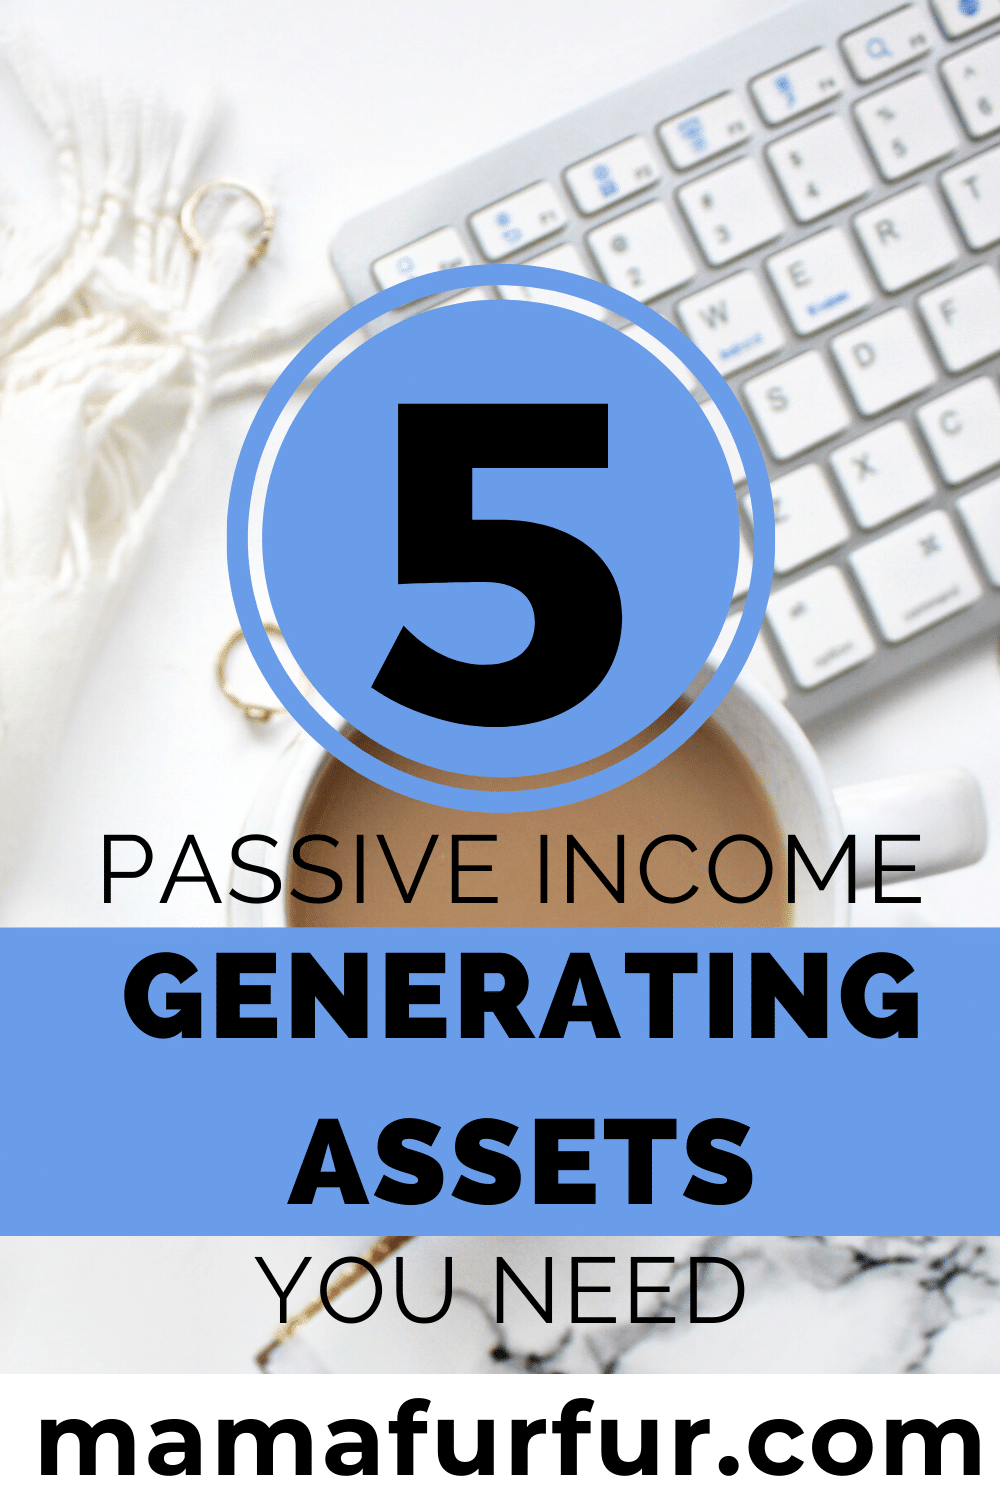 5 Passive Income Generating Assets everyone needs - Investing, Dividend Investing, Ebooks, Courses, Home Rentals